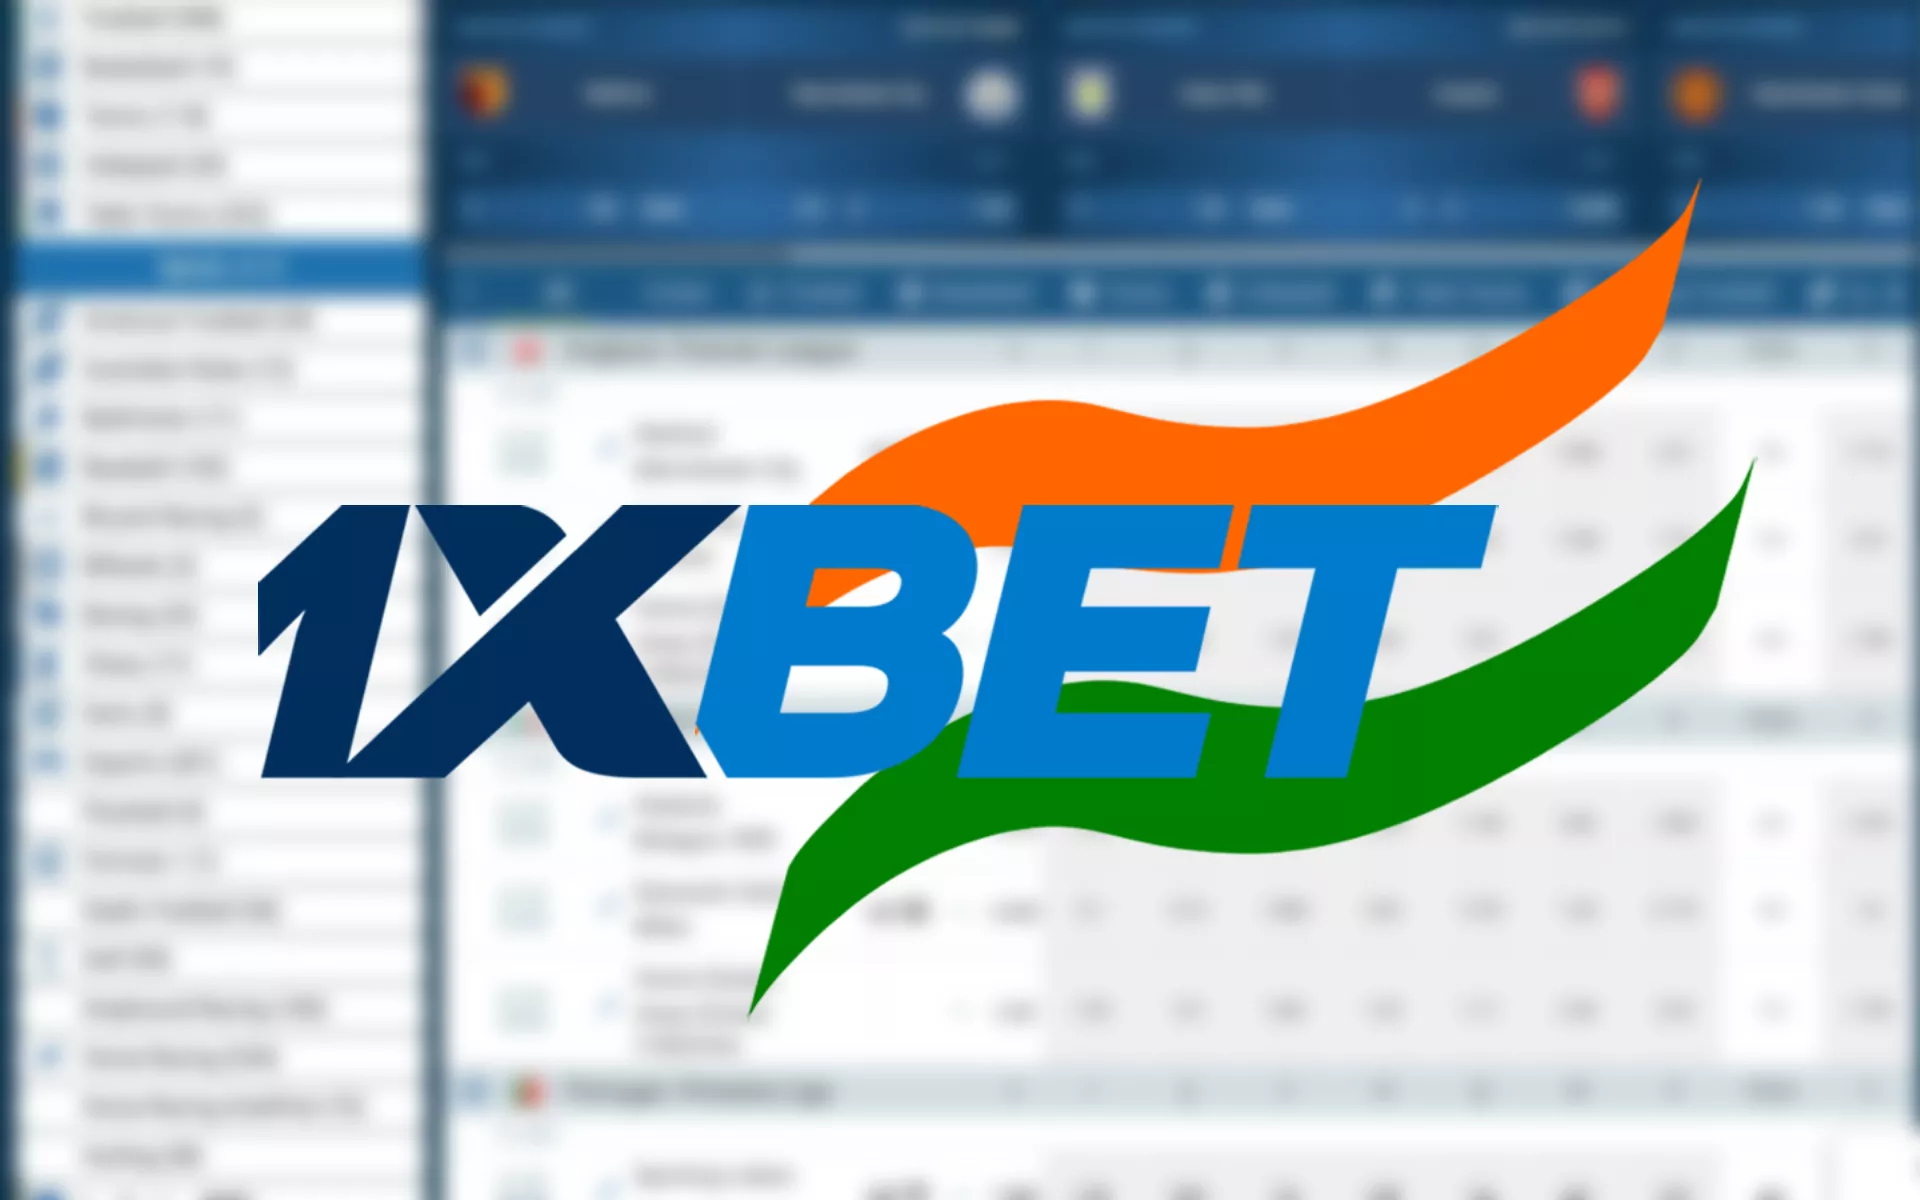 On 1xBet you will find all the sports and esports disciplines you want.